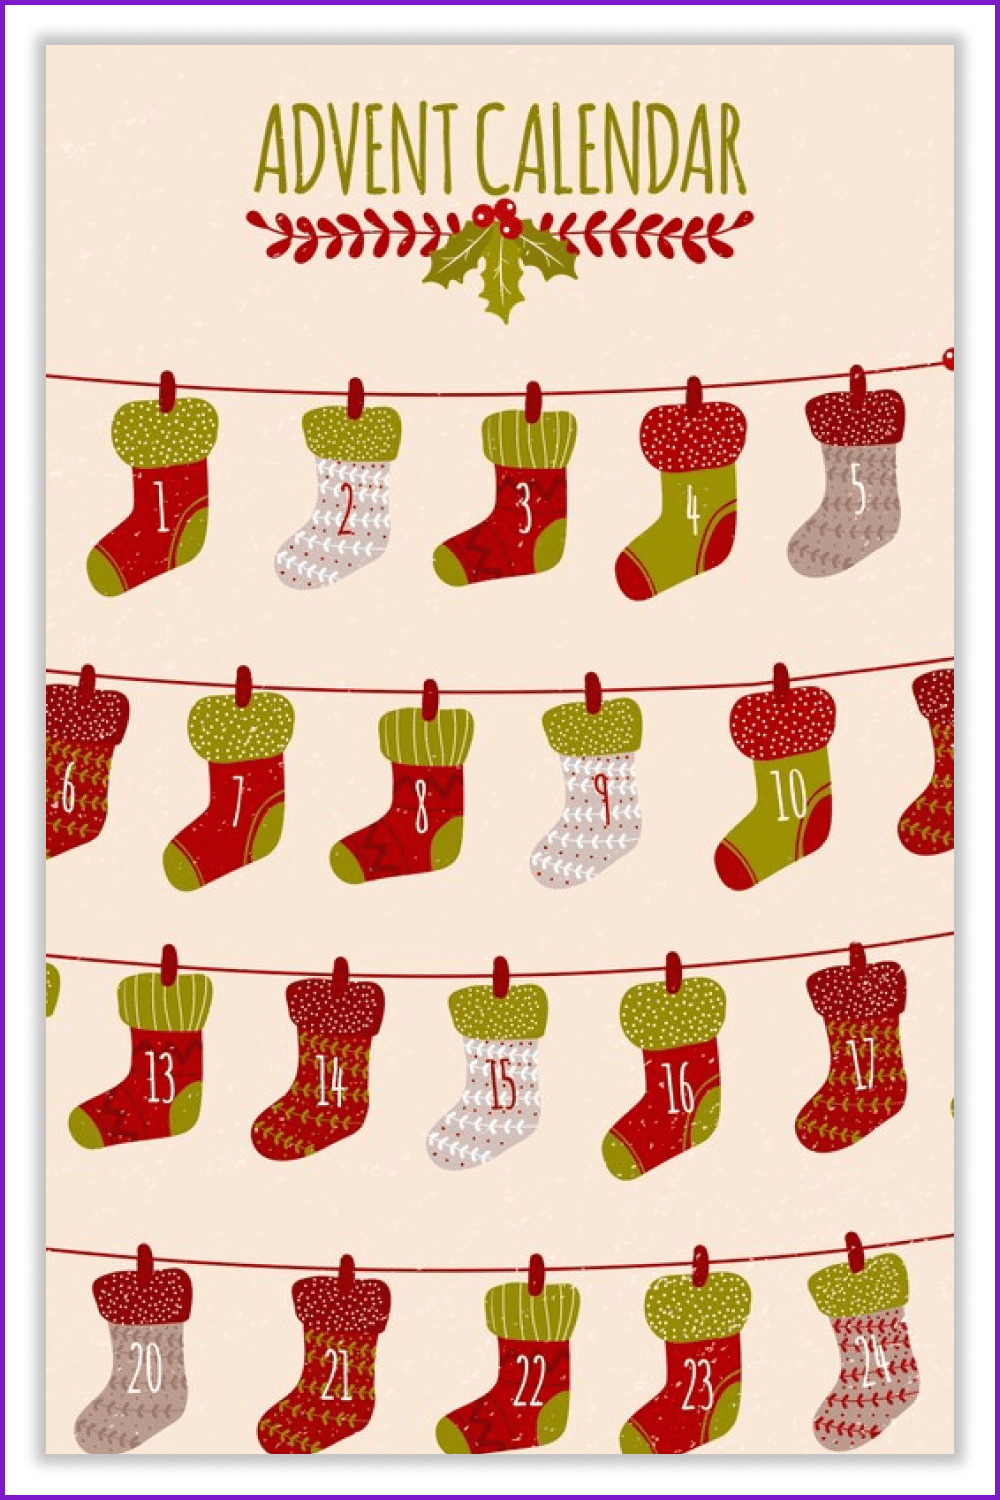 Calendar with days in the shape of Christmas socks.